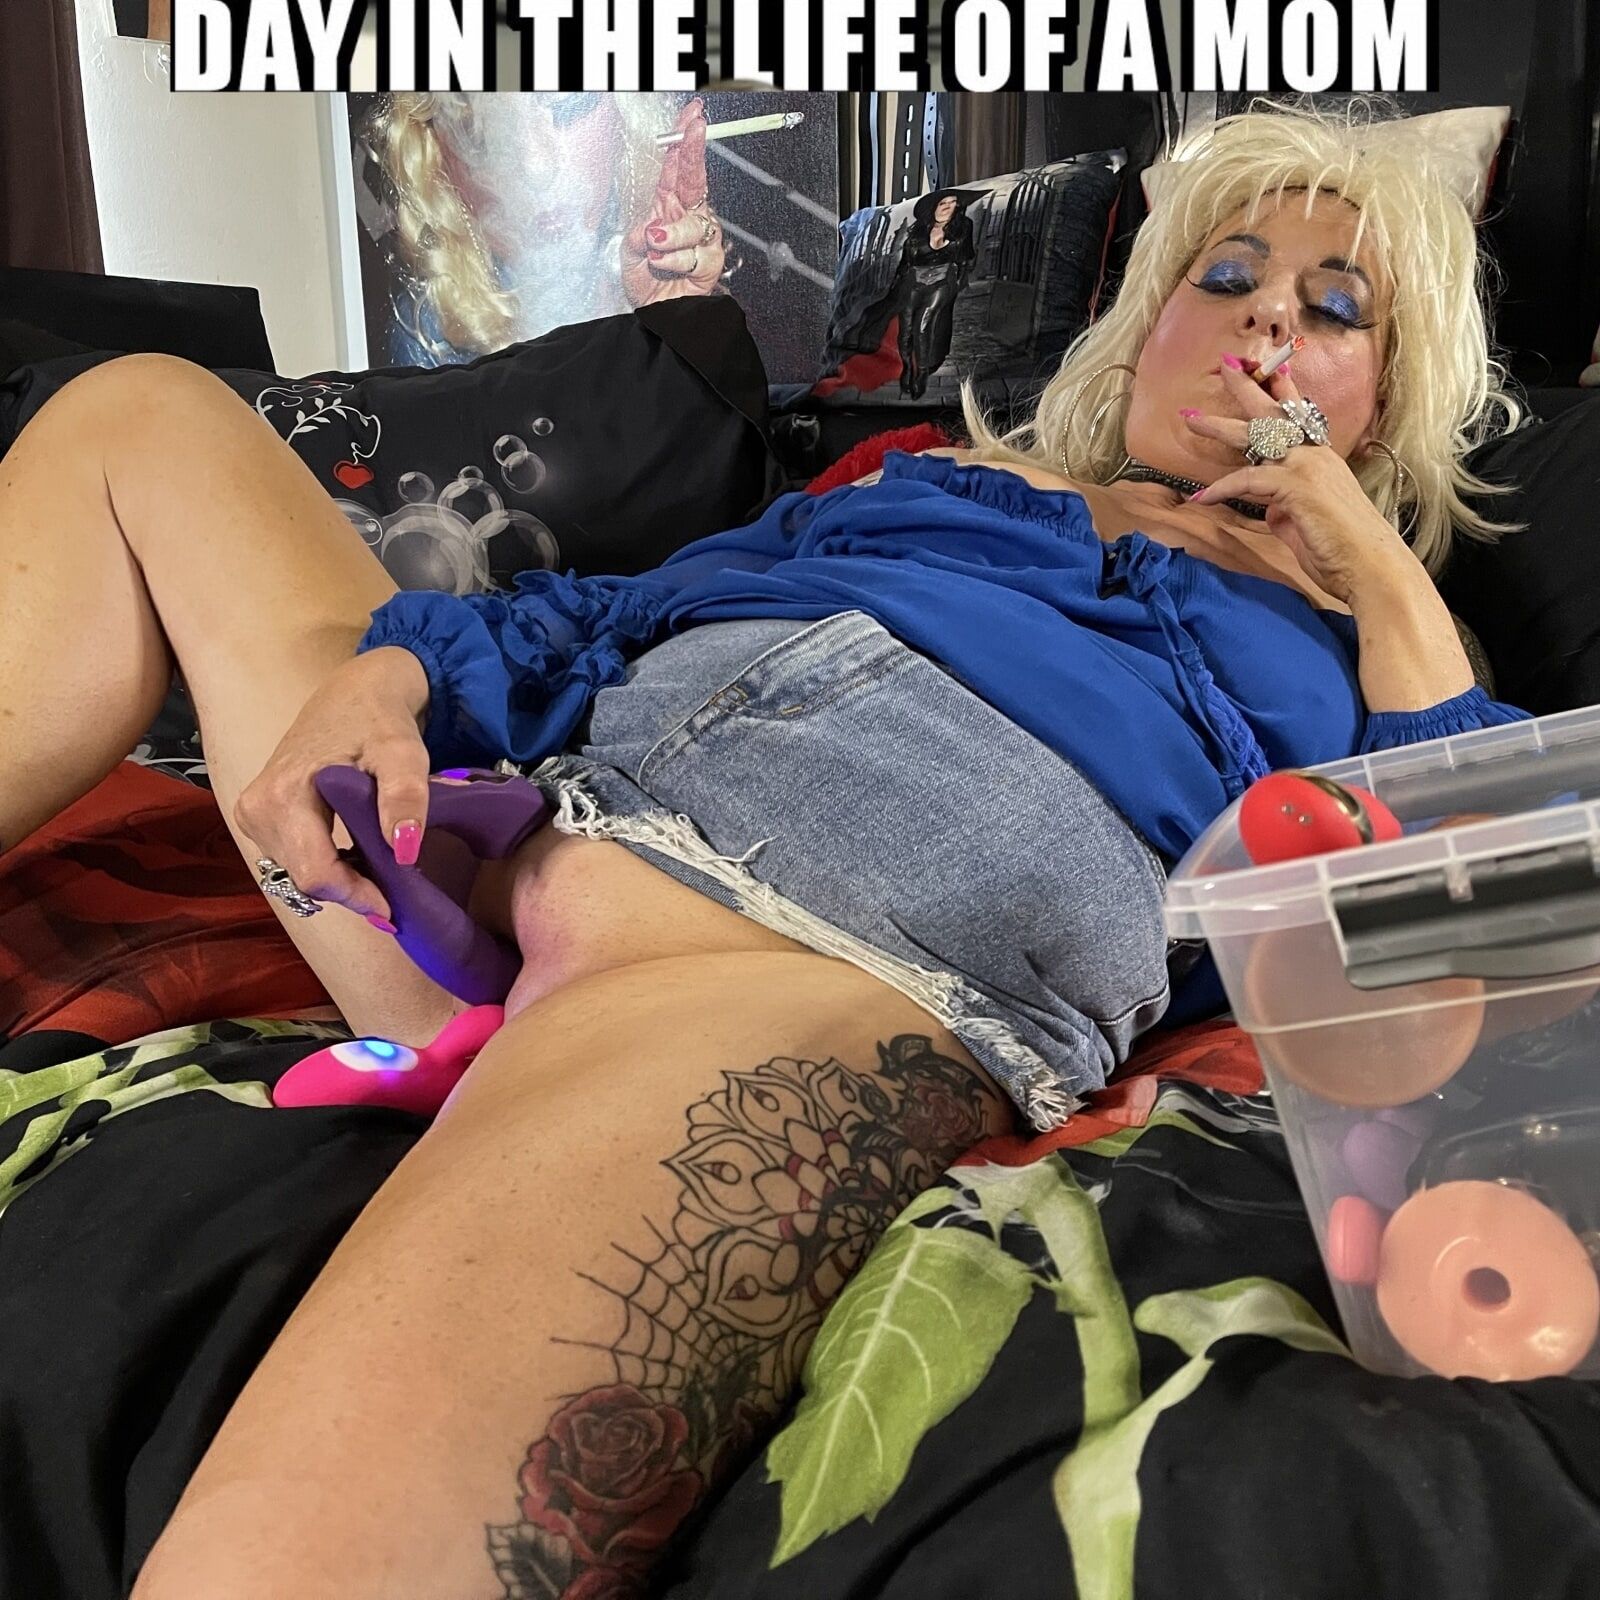 SHIRLEY THE LIFE OF A MOM #11